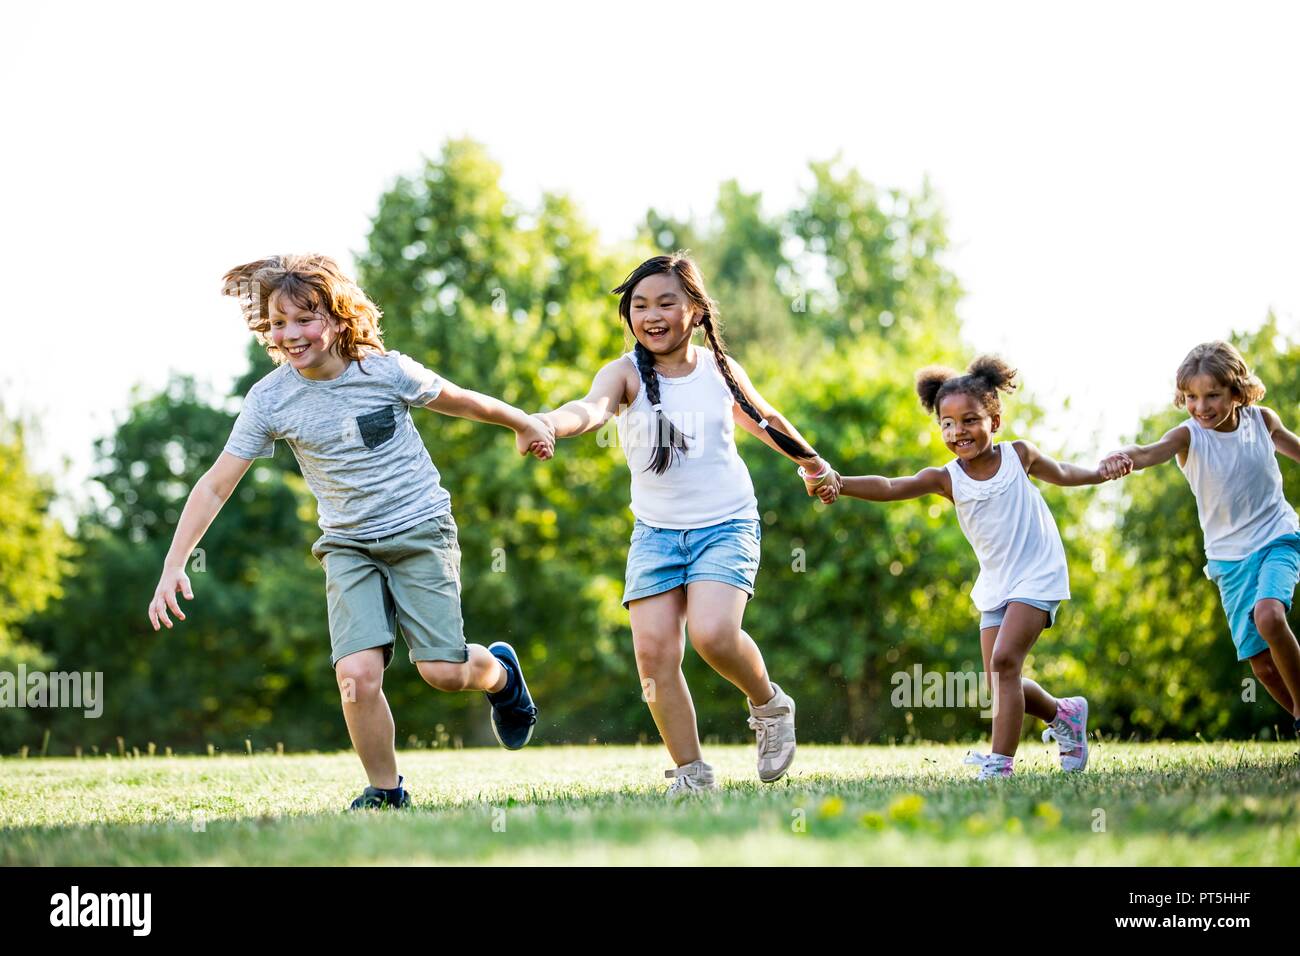 Children holding hands and running in park, laughing. Stock Photo